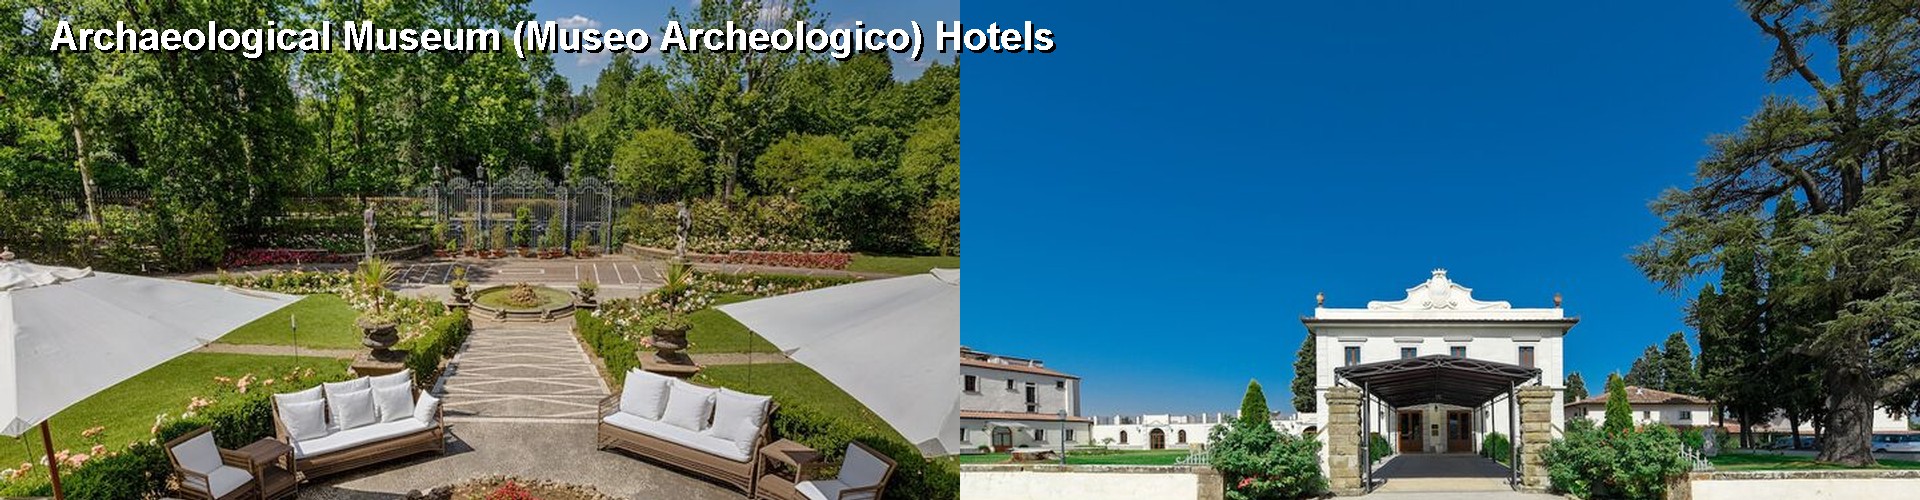 5 Best Hotels near Archaeological Museum (Museo Archeologico)